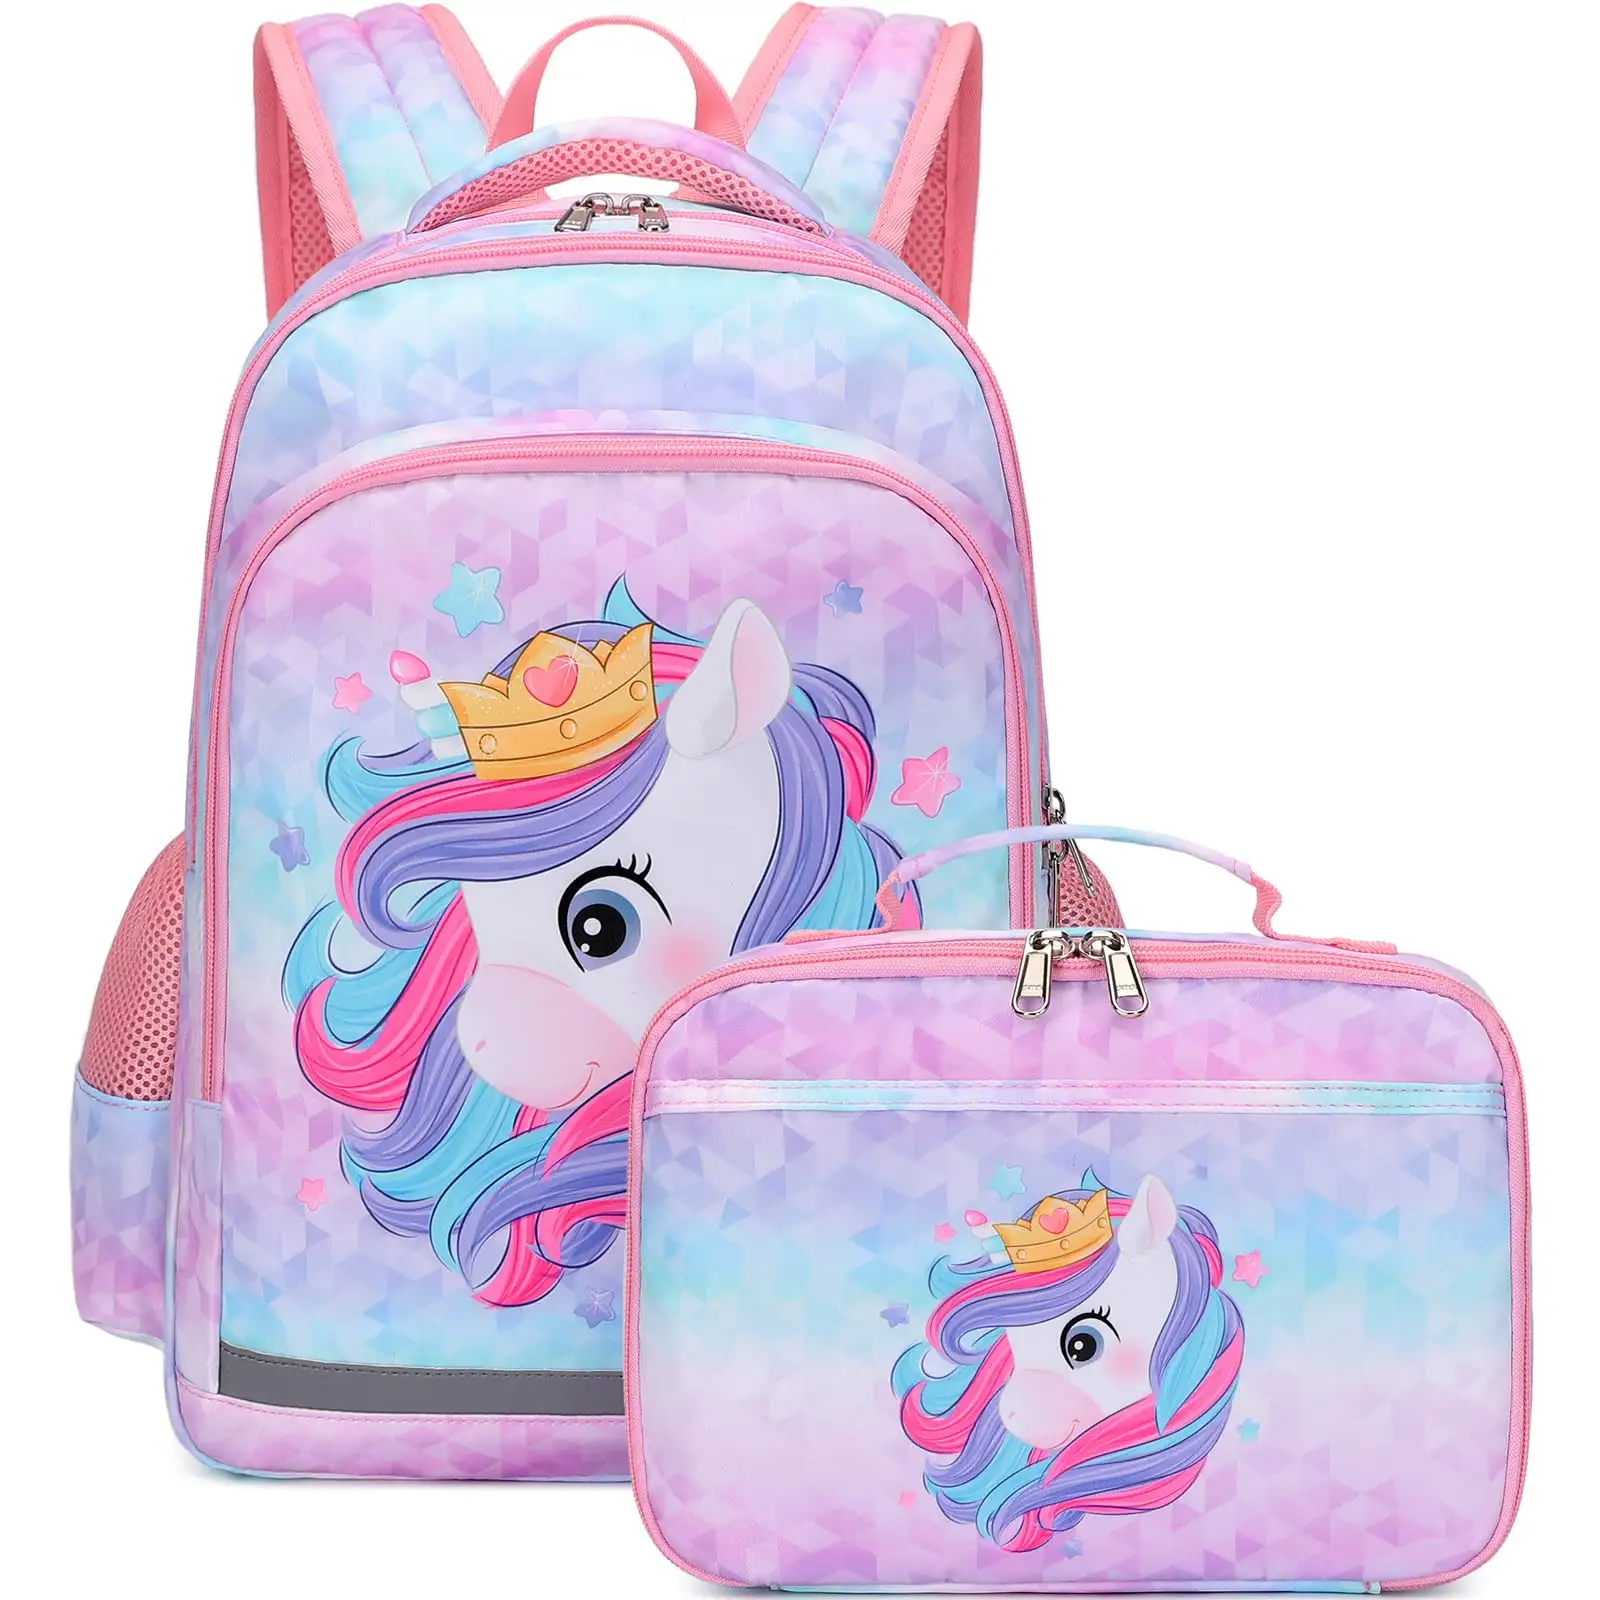 Girls Backpack children's schoolbag with insulated lunch tote bag Kids Student Child Teenagers Book School Bags for girls